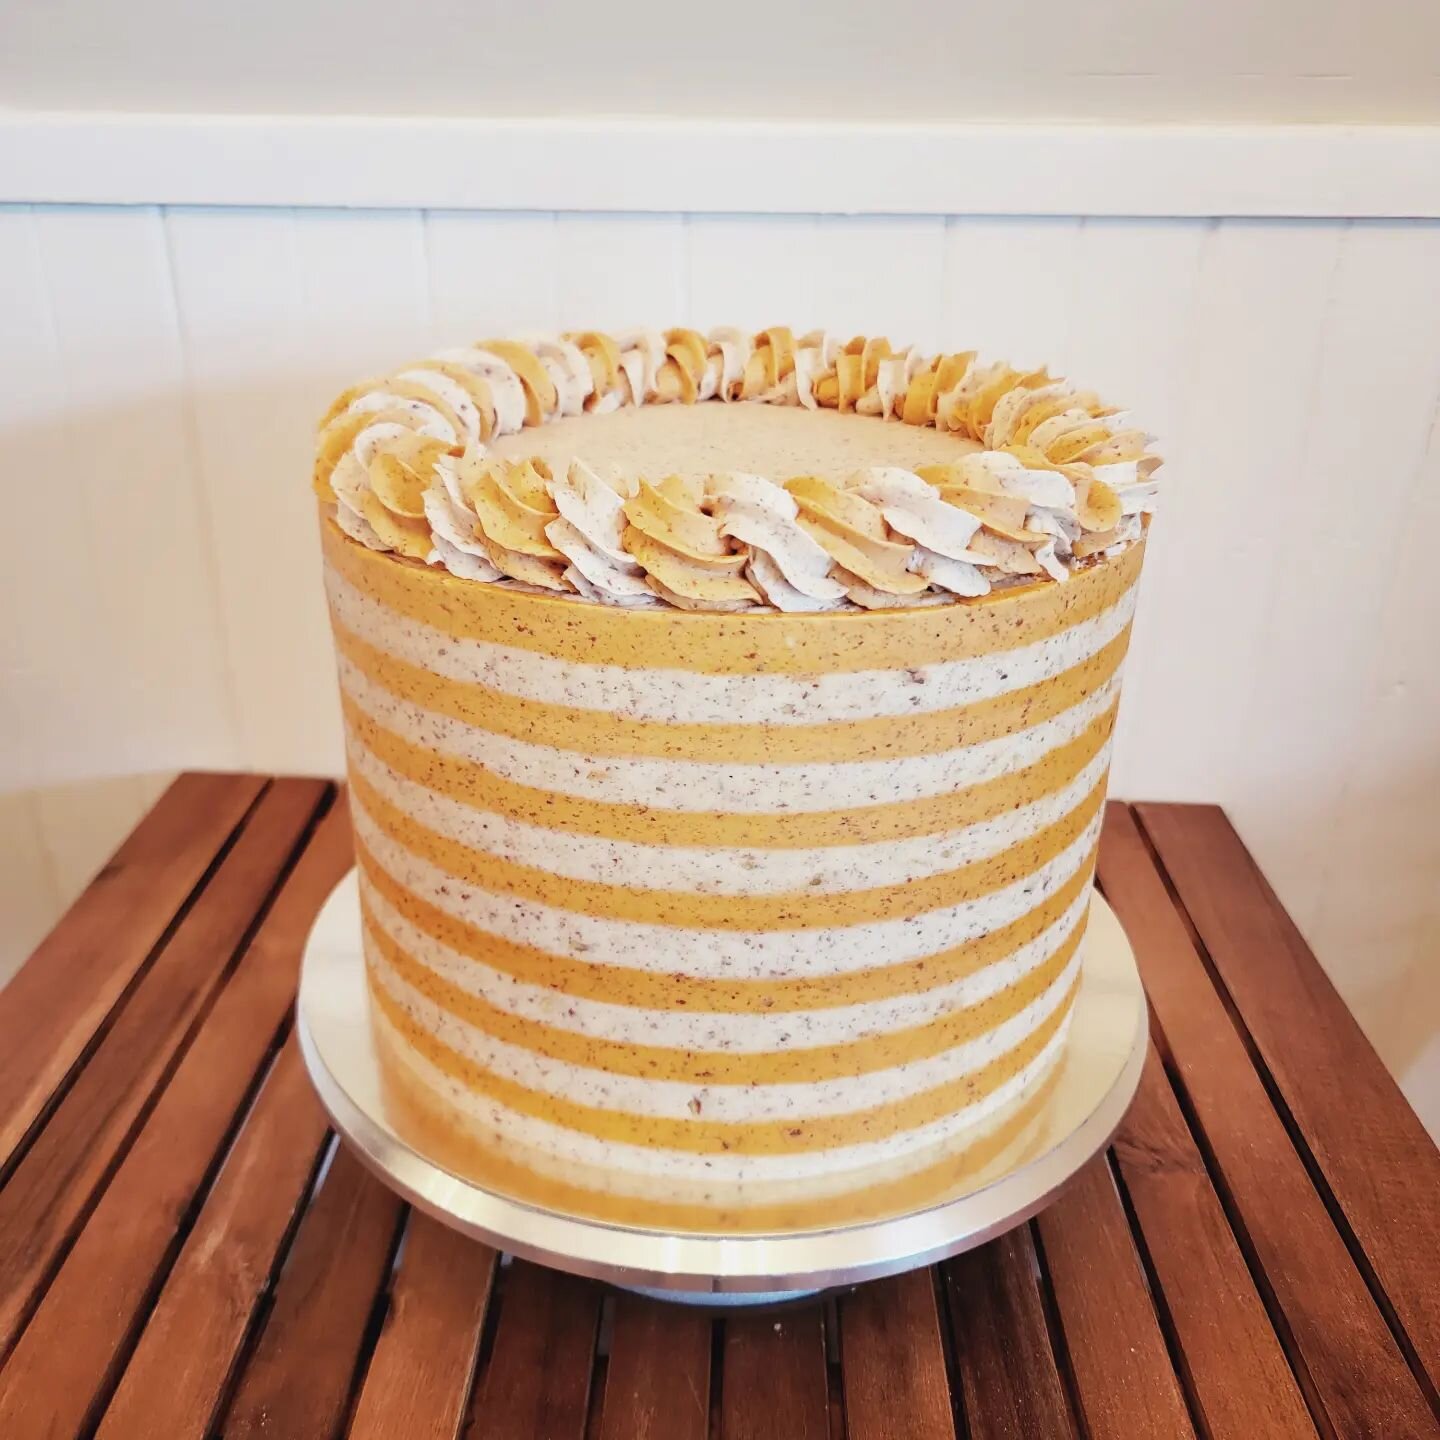 Everything Pumpkin Pecan

Tender Yummy Pumpkin Spice Cake Layers filled with Pecan Pie filling and covered in Buttered Pecan Buttercream! 

#pumkincake #butteredpecan #pecanpiefilling #pumpkinspice #cakeboss #cakebaking #cakelove #cakedecorator #cake